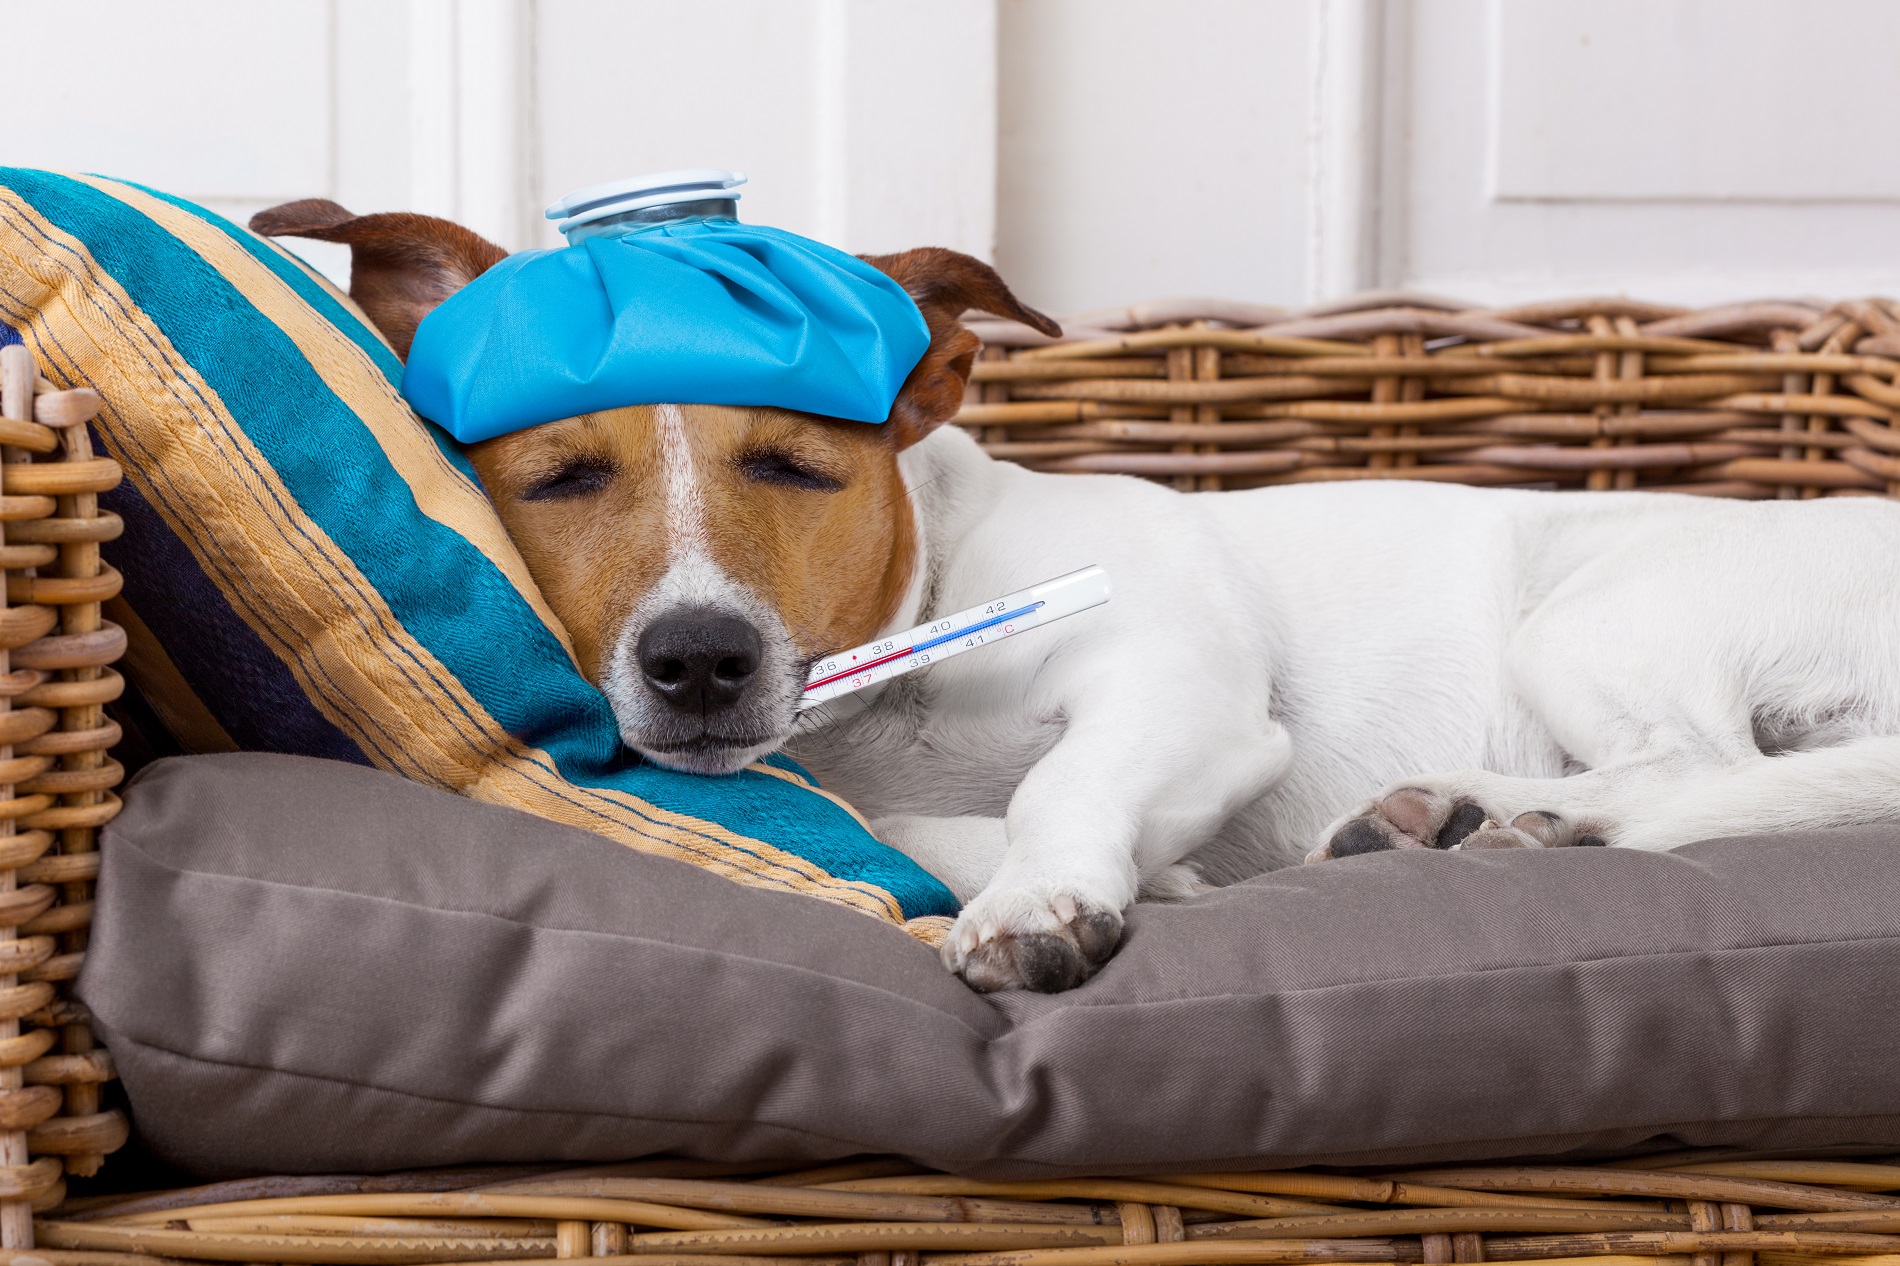 How to Take a Dog's Temperature With a Thermometer (Step by Step)